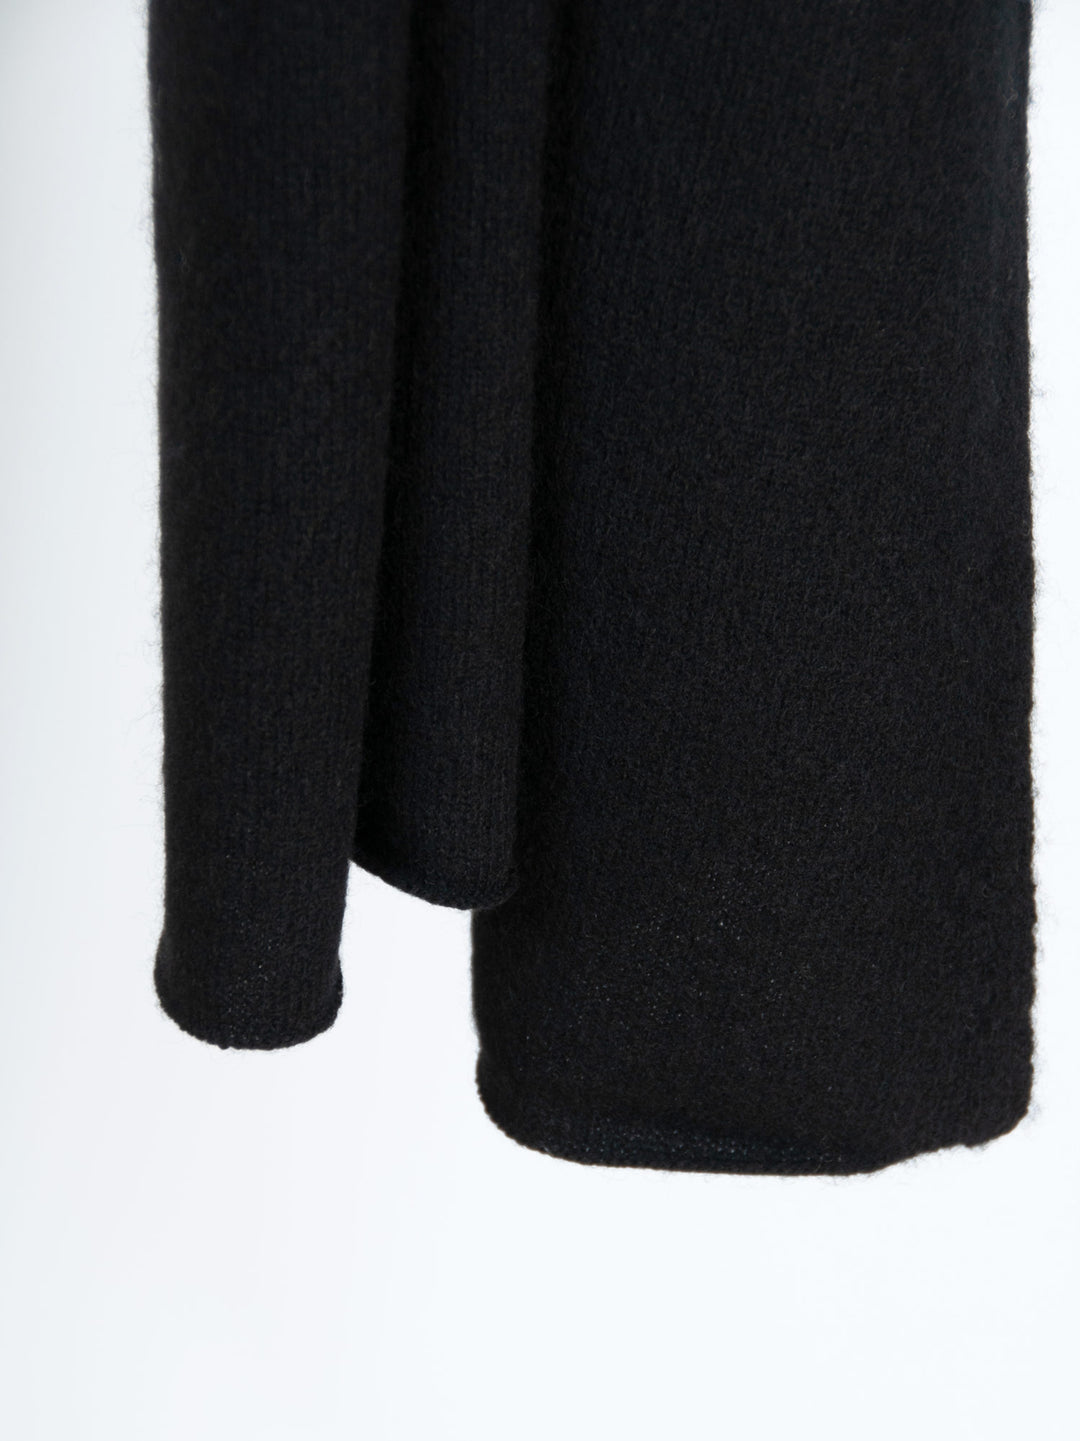 Cashmere scarf in 100% cashmere from Kashmina